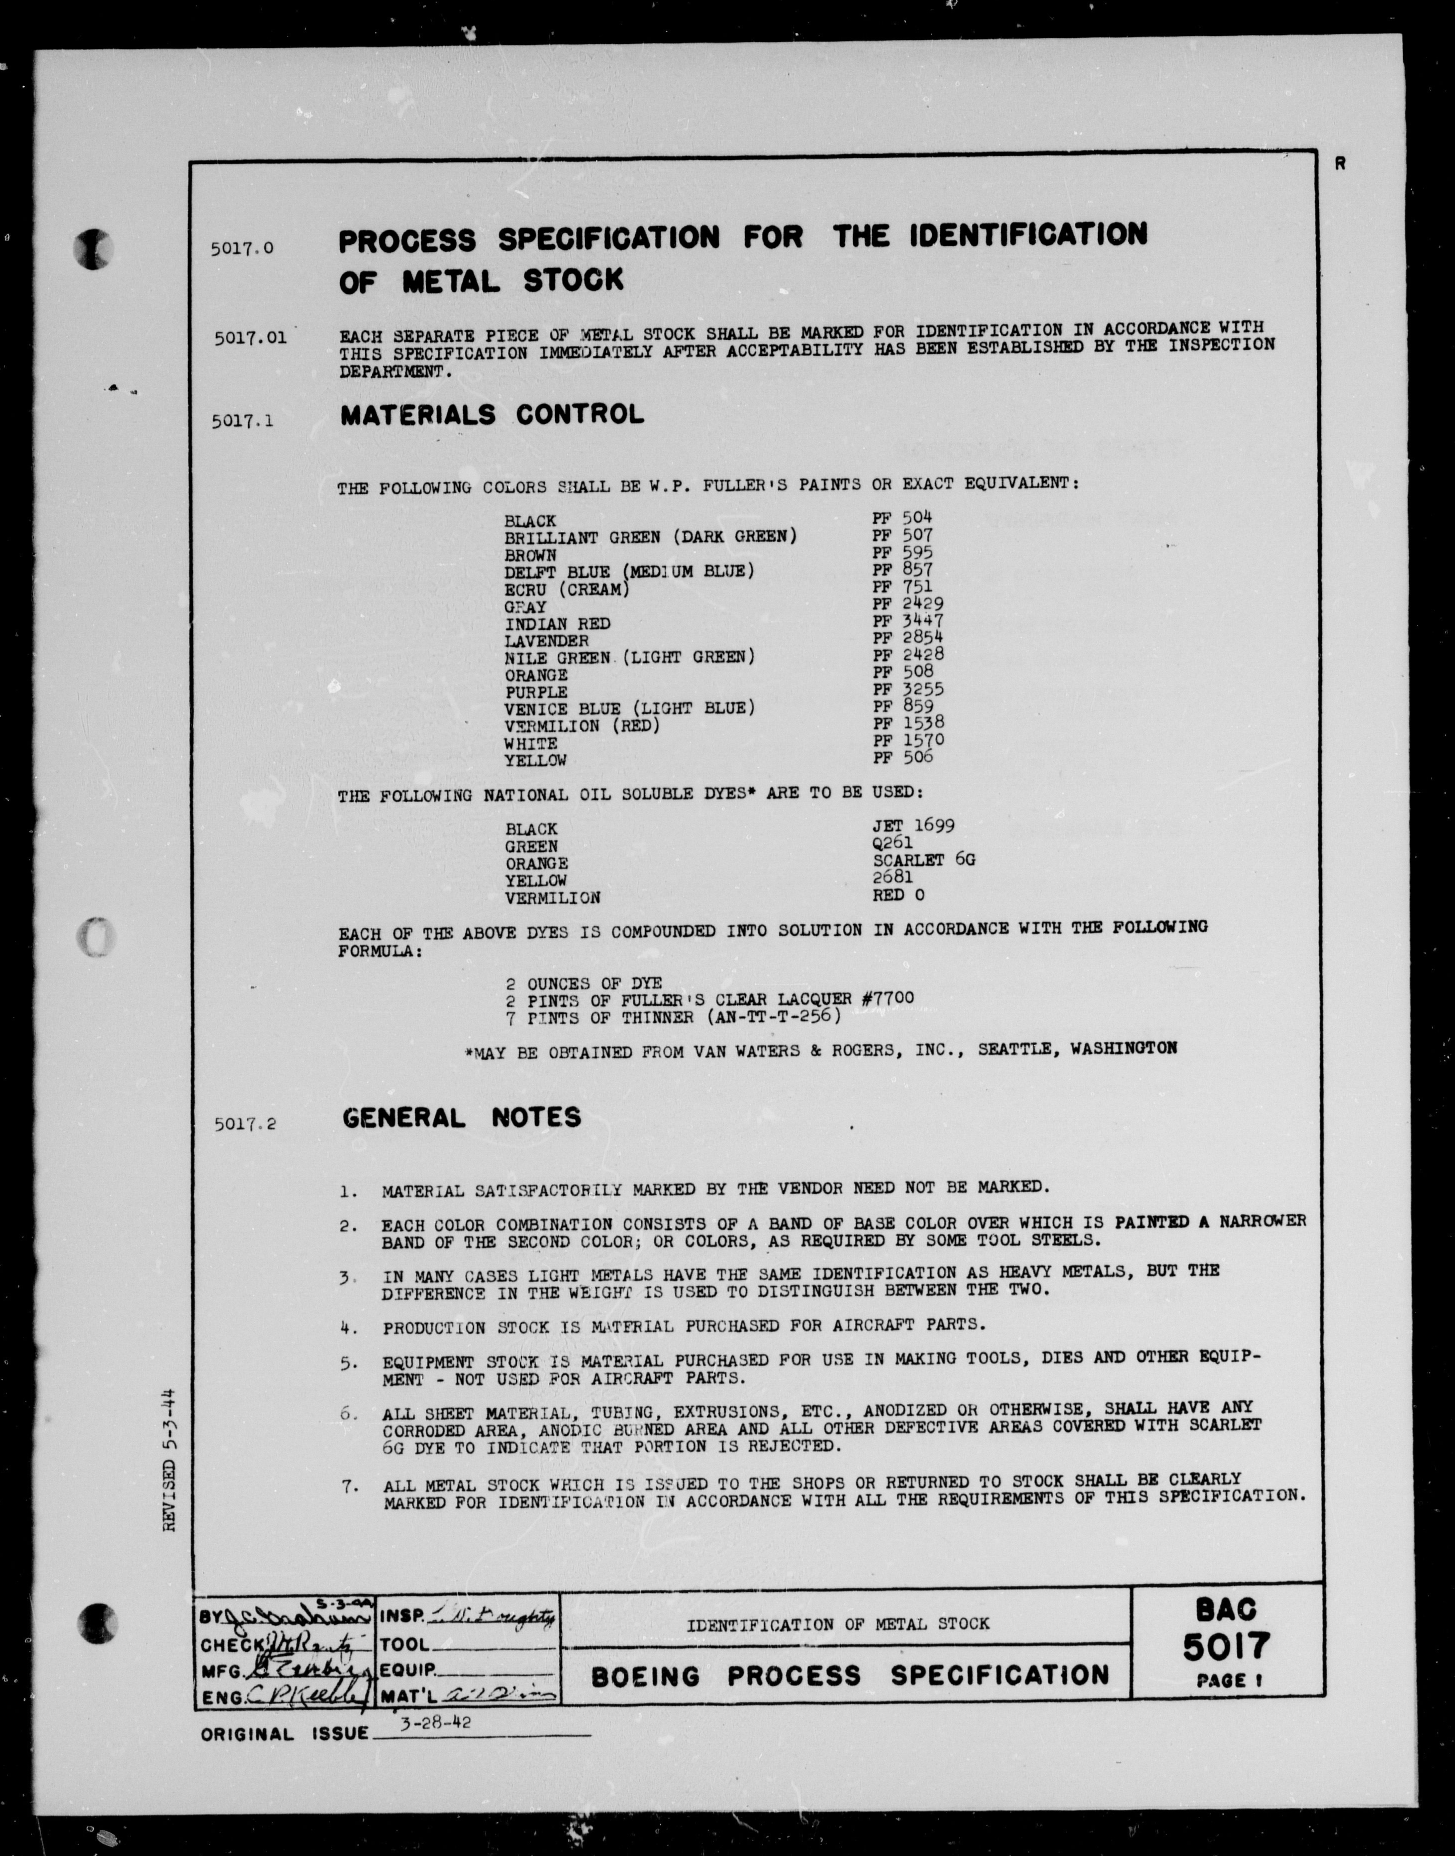 Sample page 1 from AirCorps Library document: Identification of Metal Stock